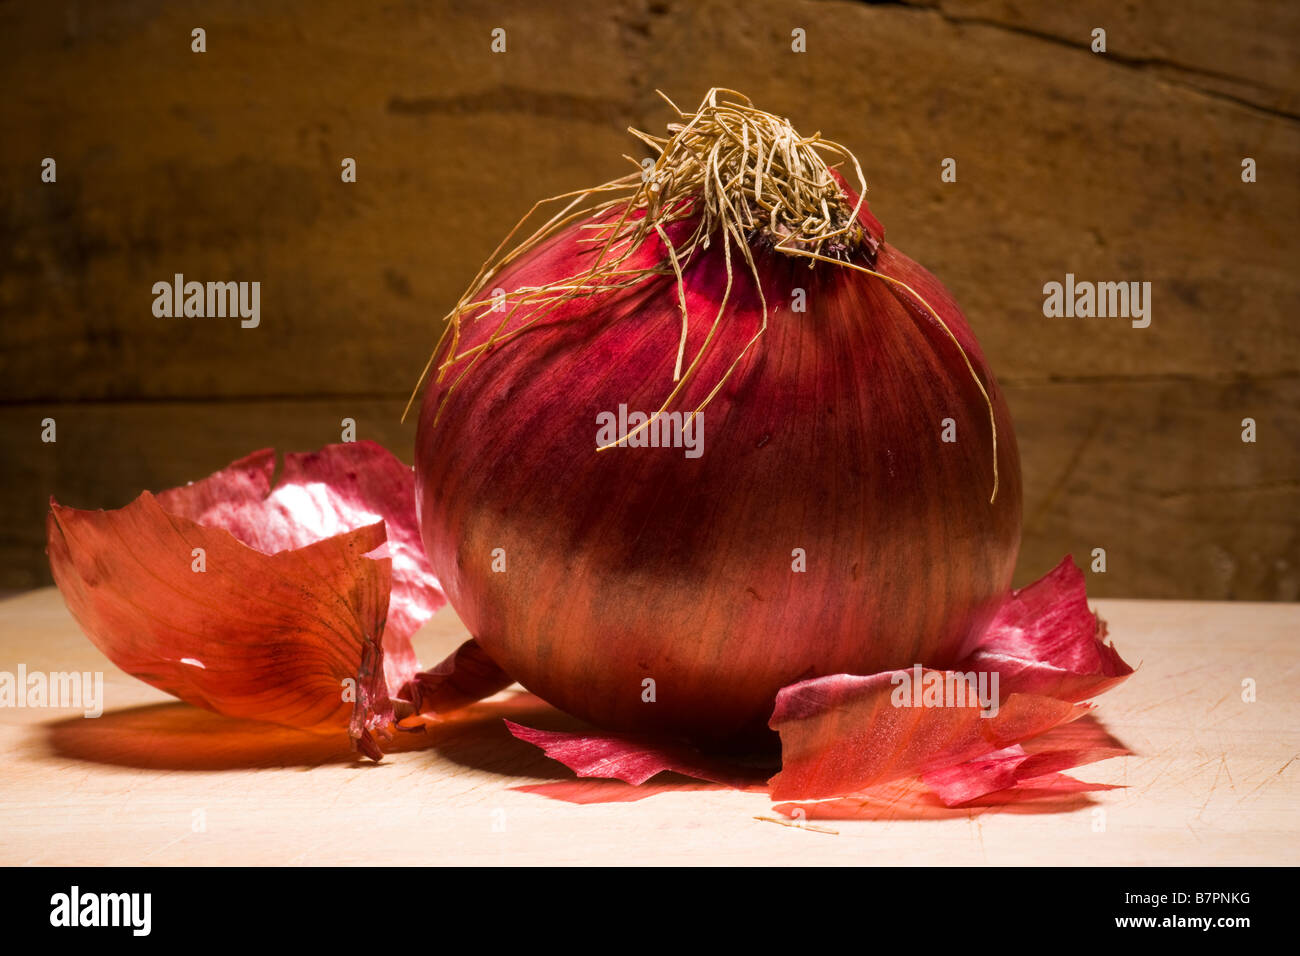 Studio still lifes of a red onion in front of a wood background Stock Photo